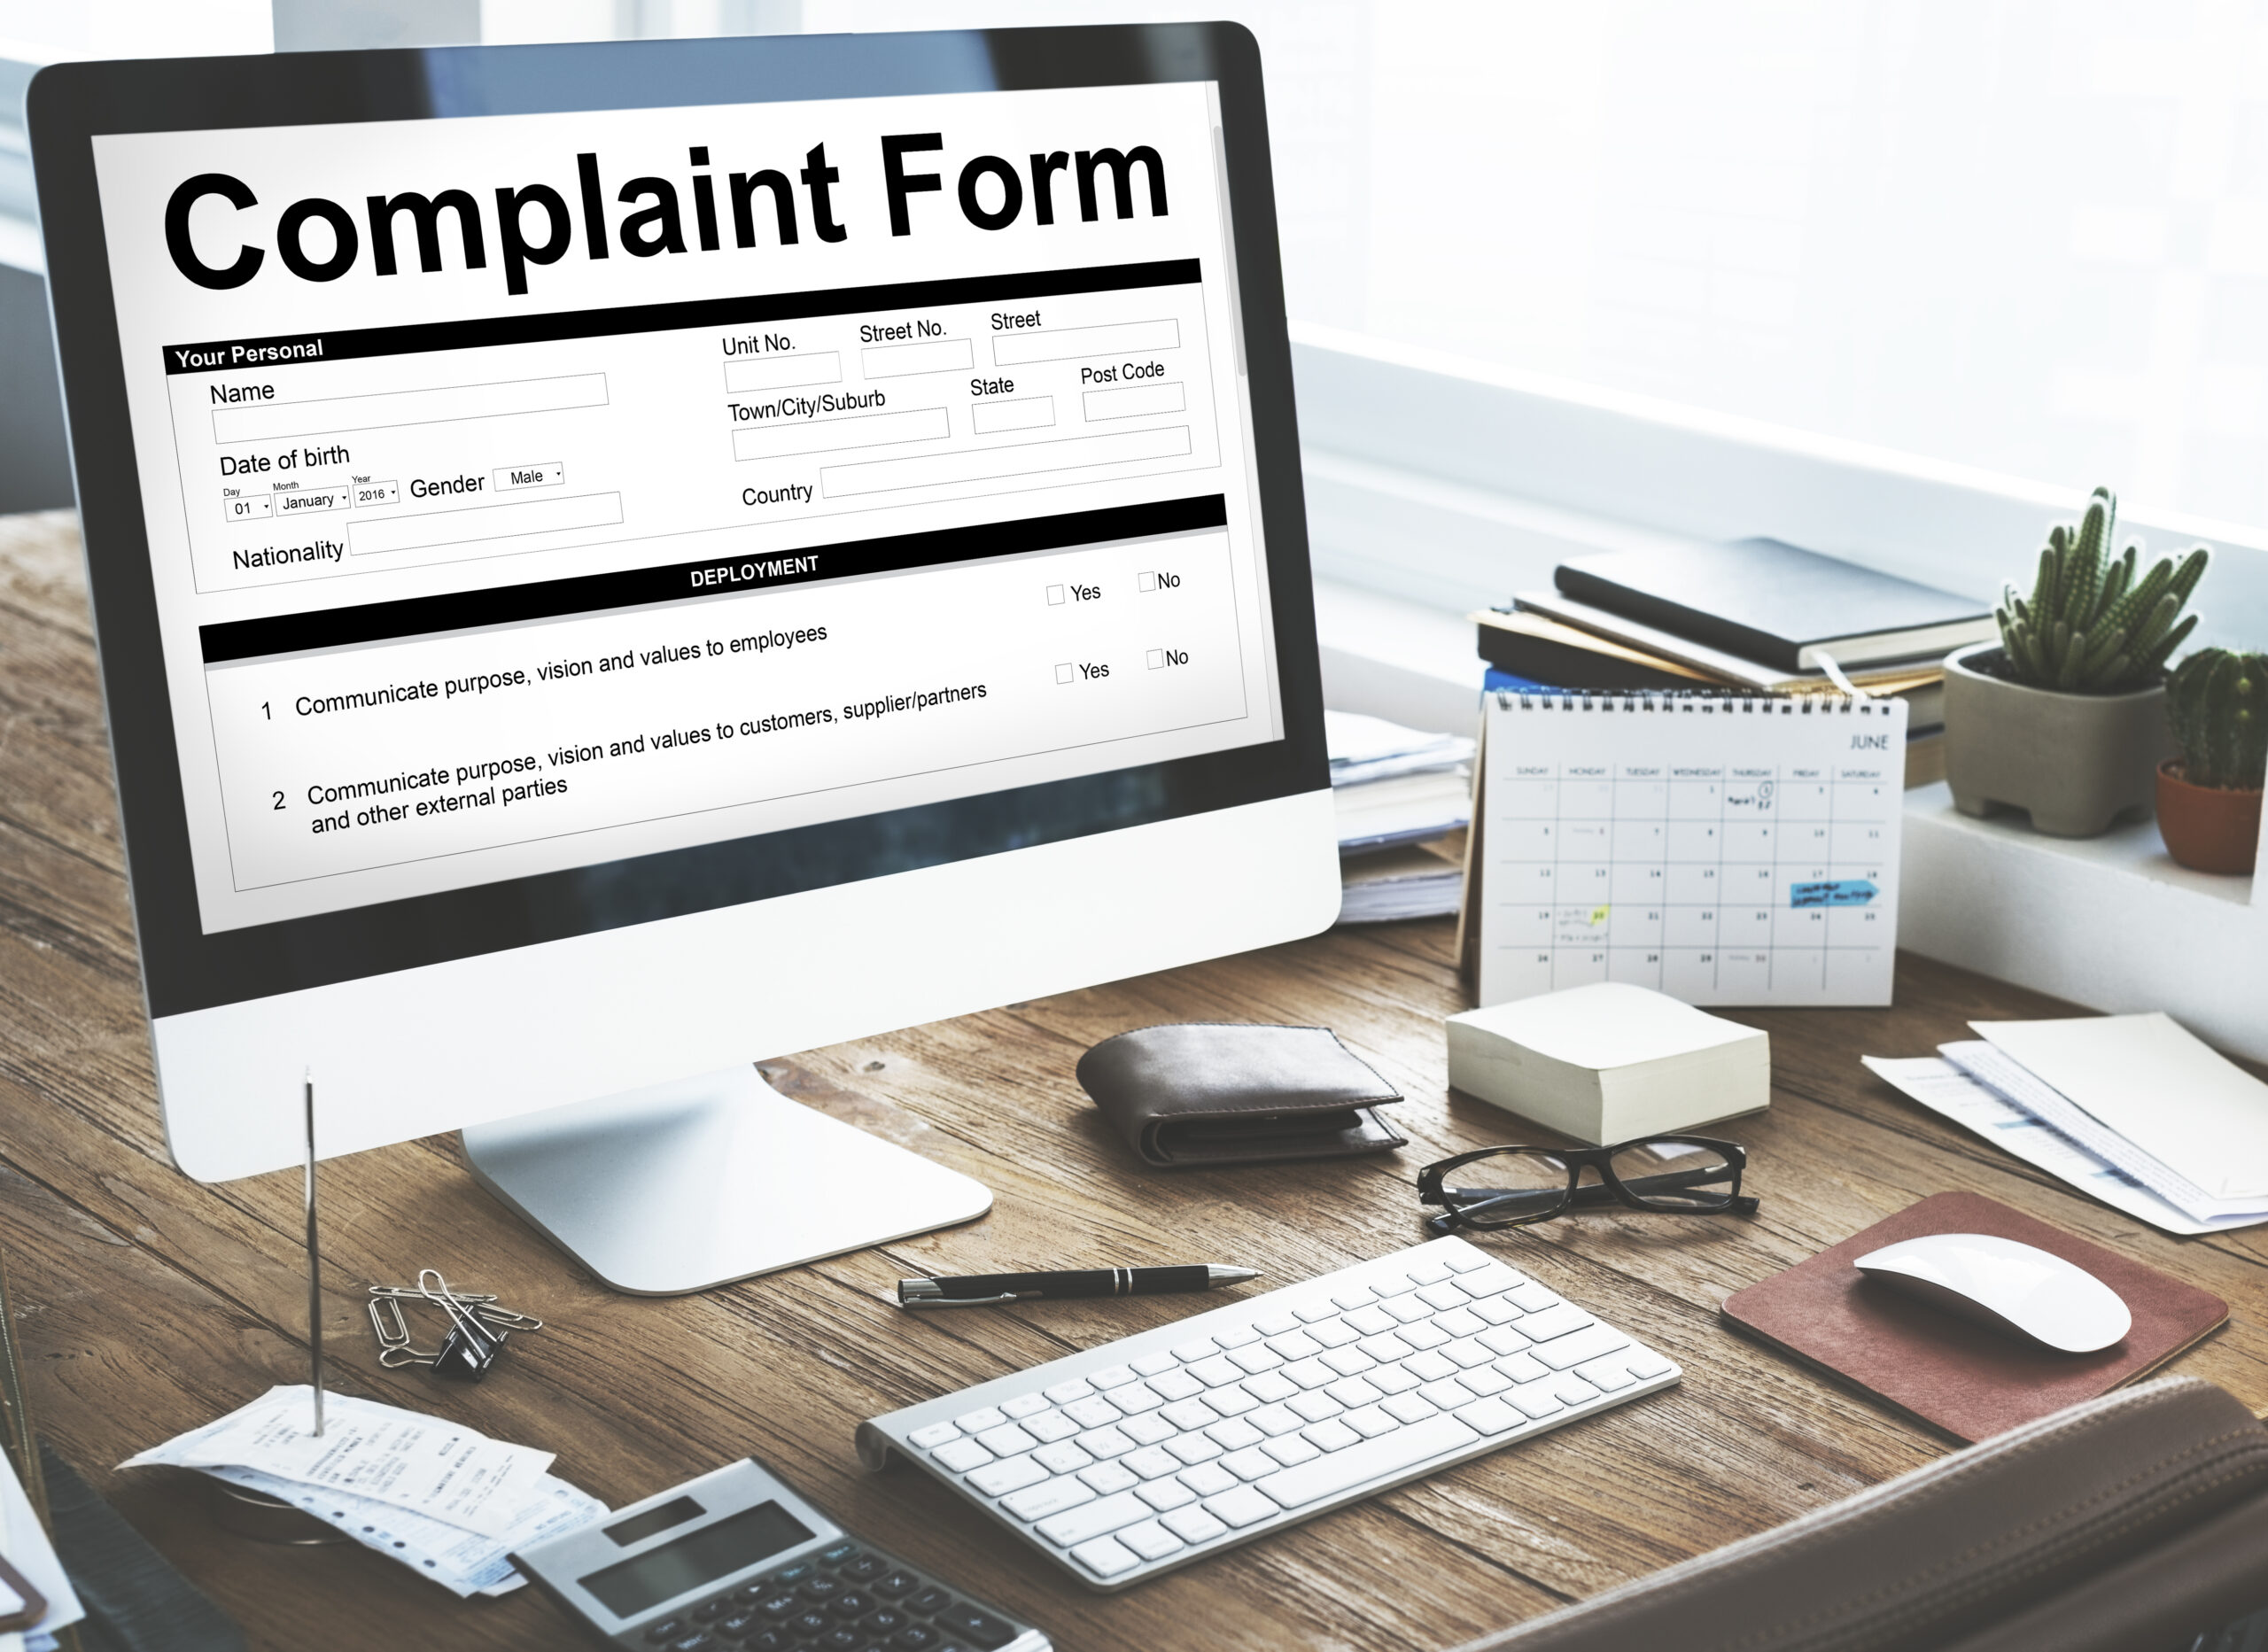 How to Make a Complaint